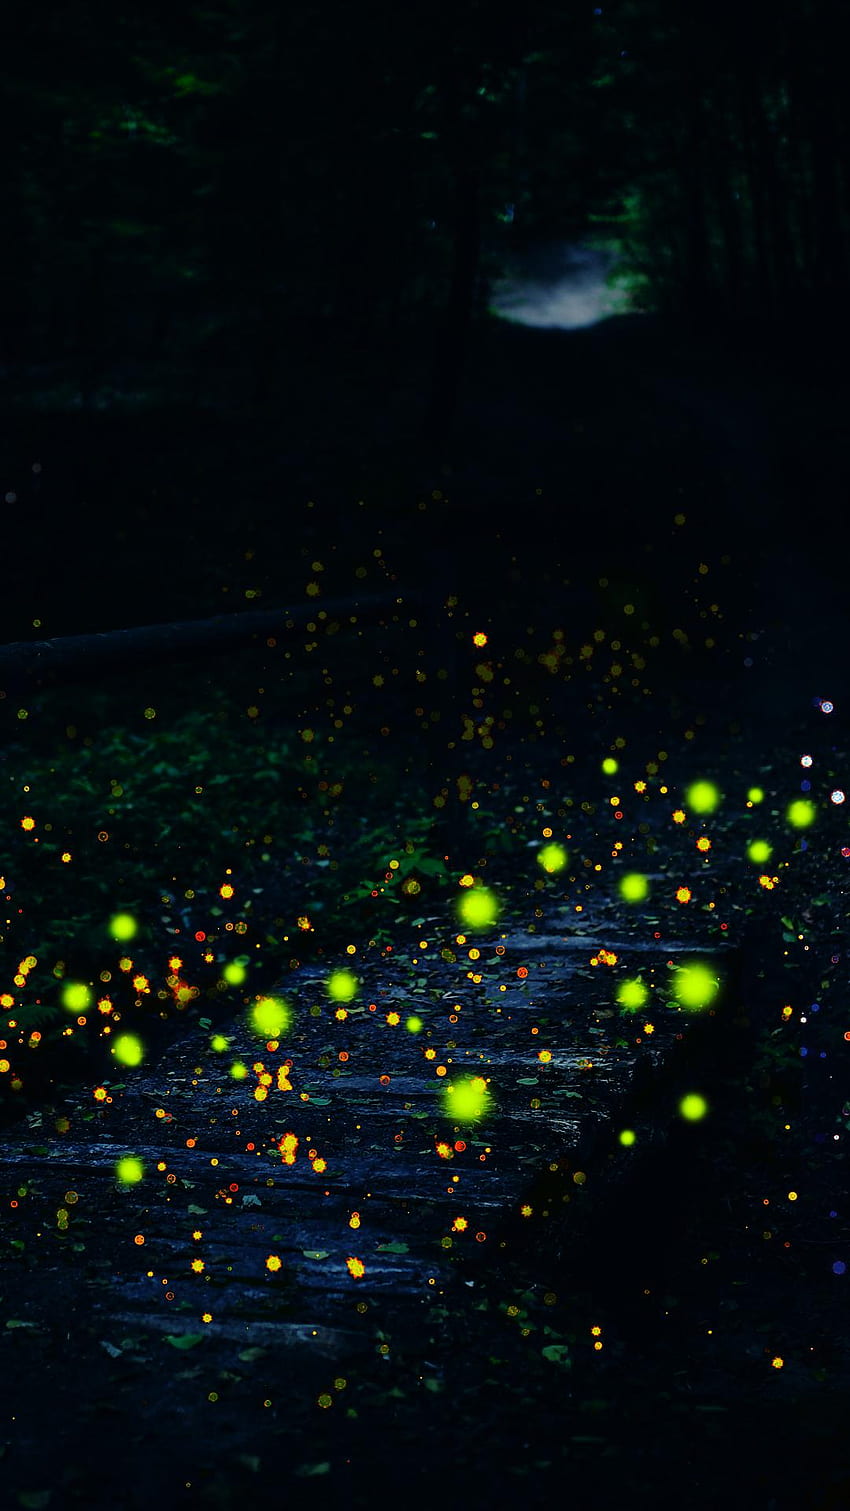 Firefly APUS Live APK 1.1 for Android – Firefly APUS Live APK Latest Version, Fireflies HD phone wallpaper